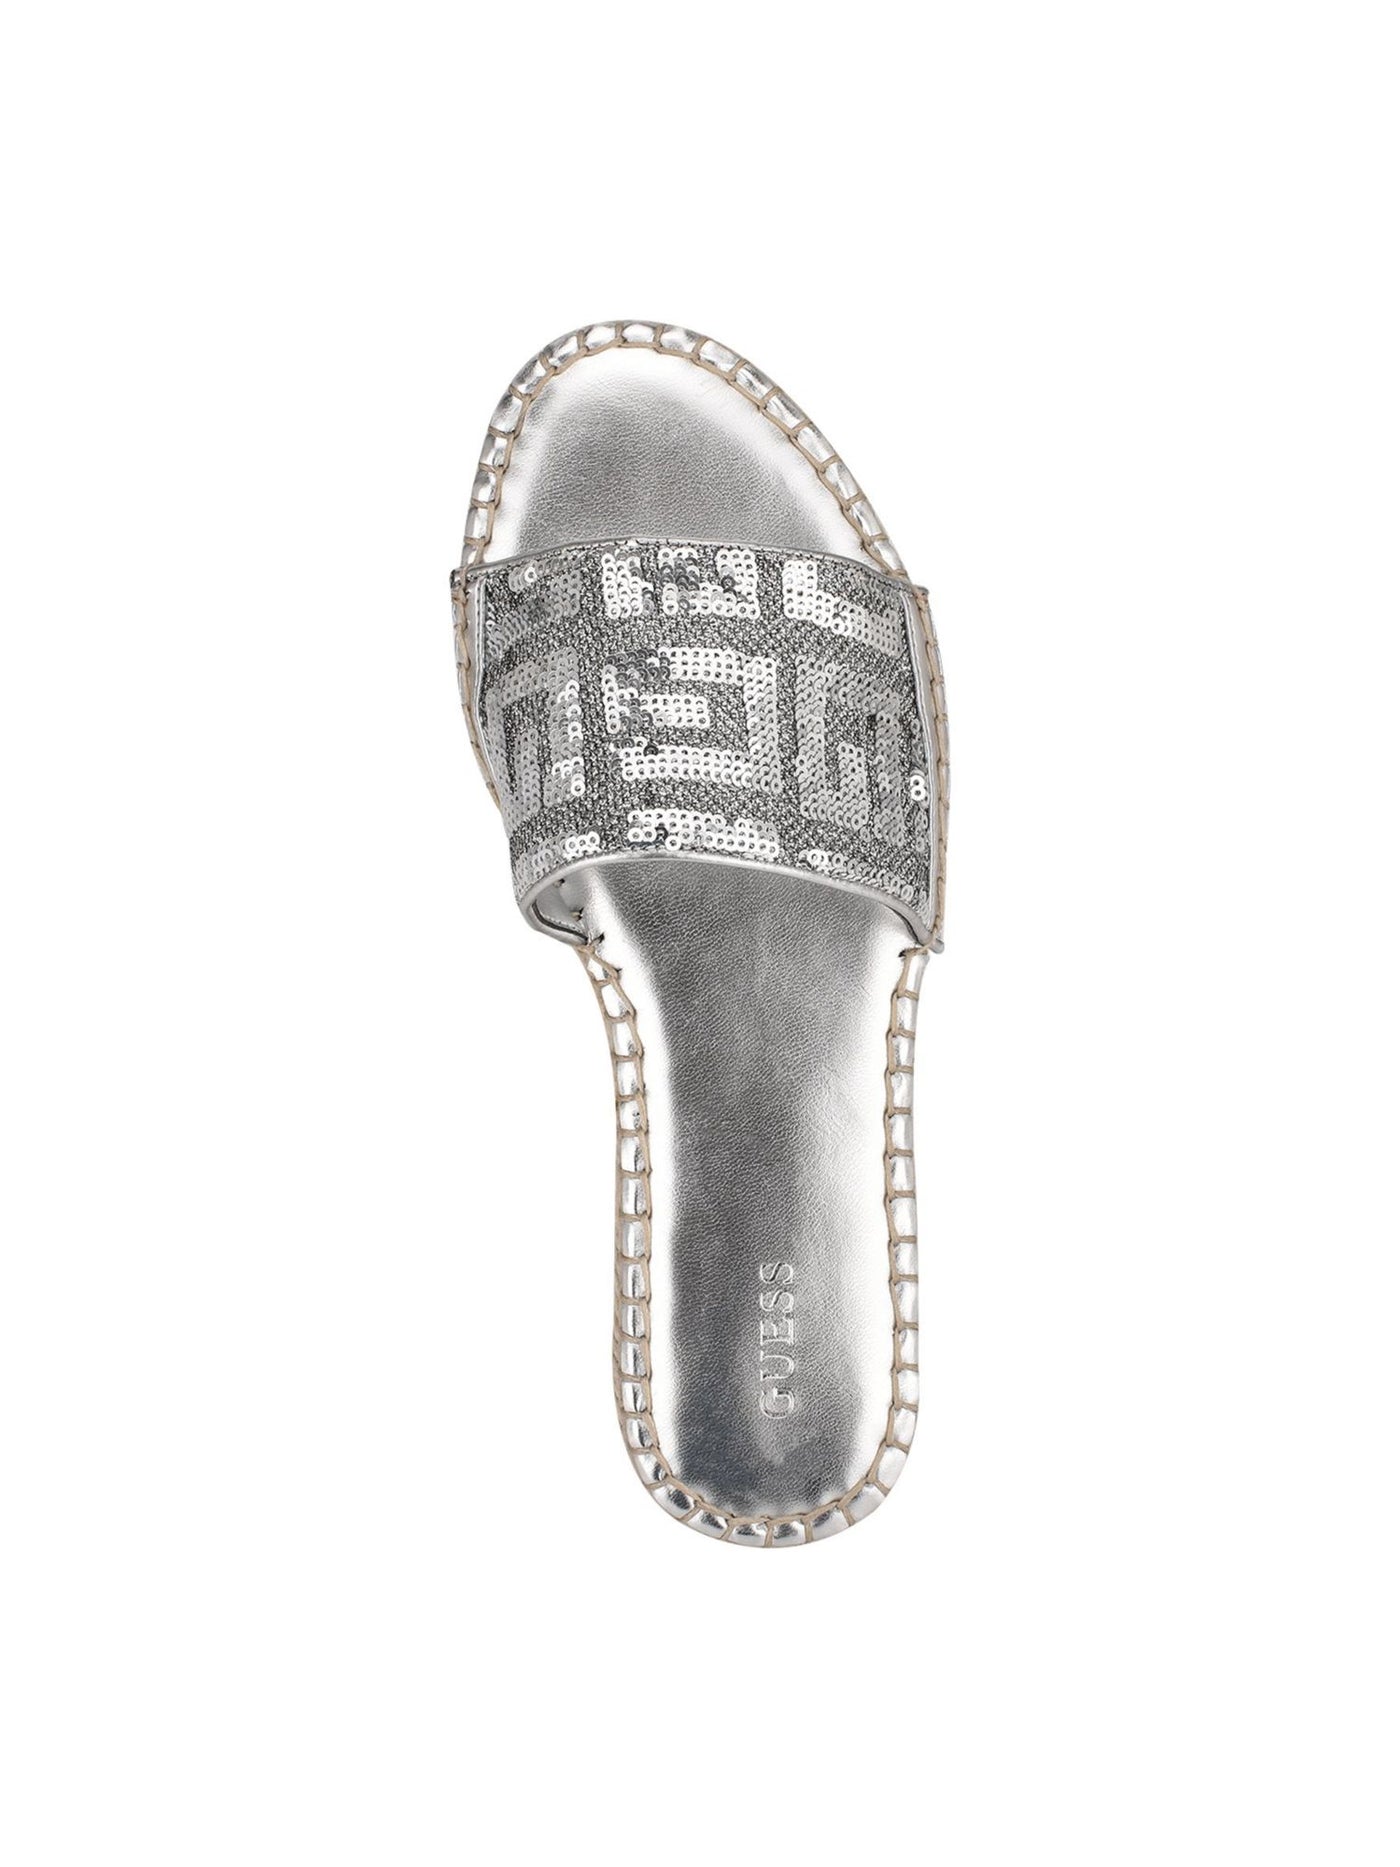 GUESS Womens Silver Jute Wrapped Sequined Comfort Guidany Round Toe Platform Slide Sandals Shoes 6.5 M